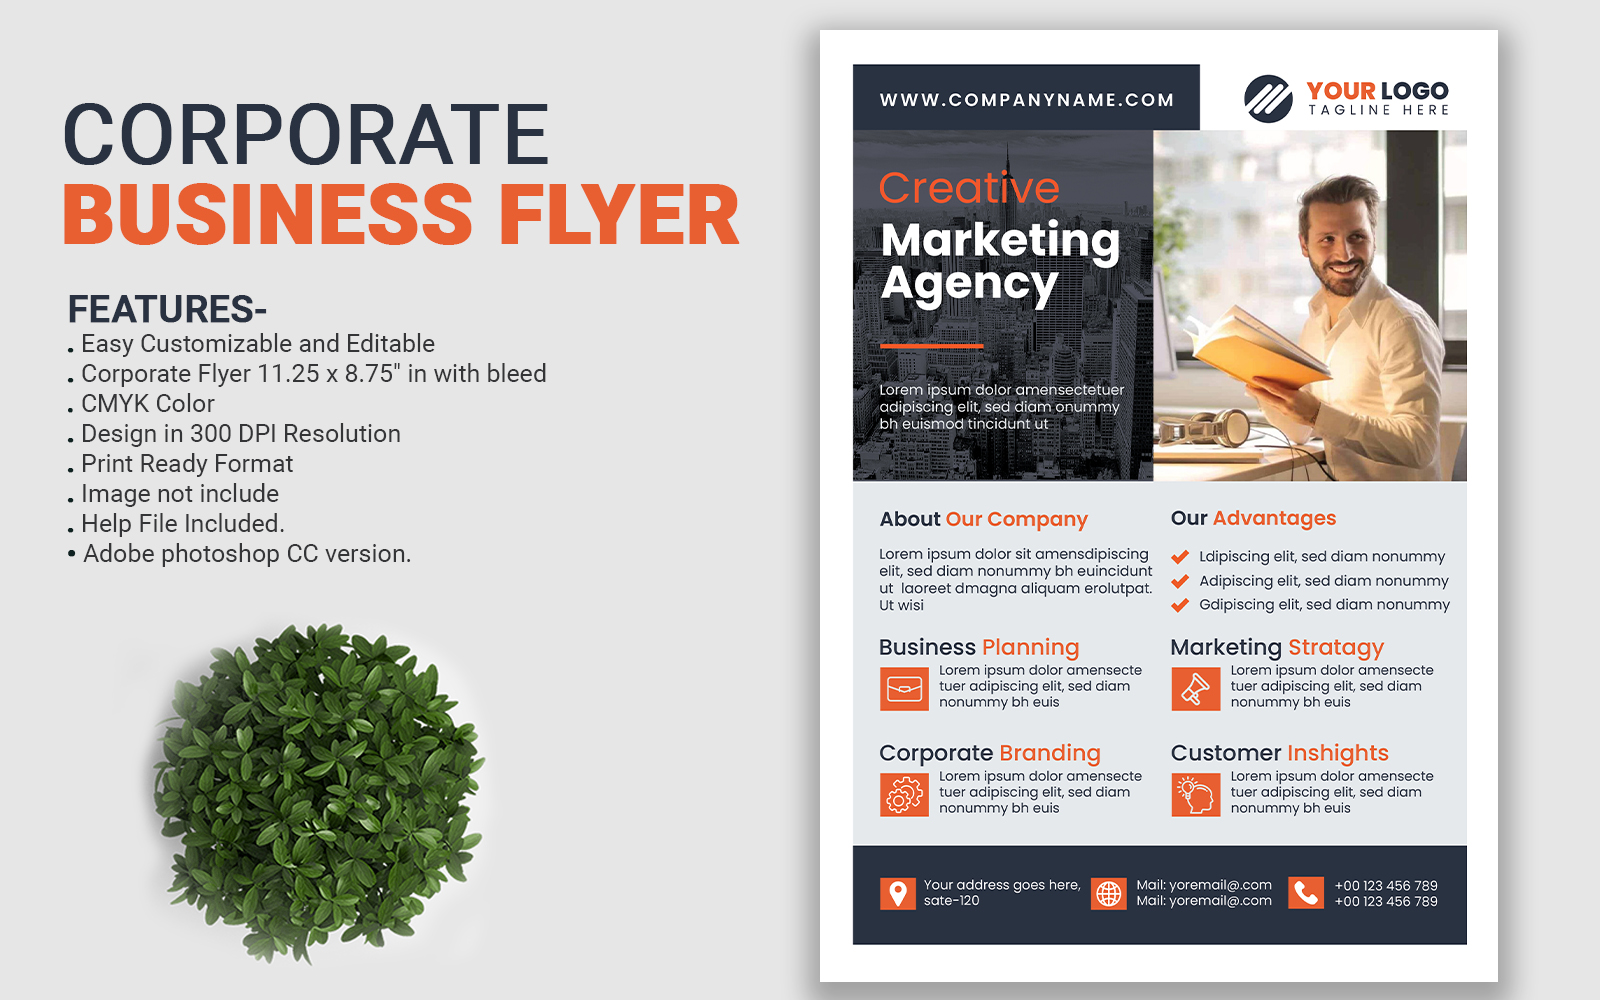 Corporate Business Flyer Template #15